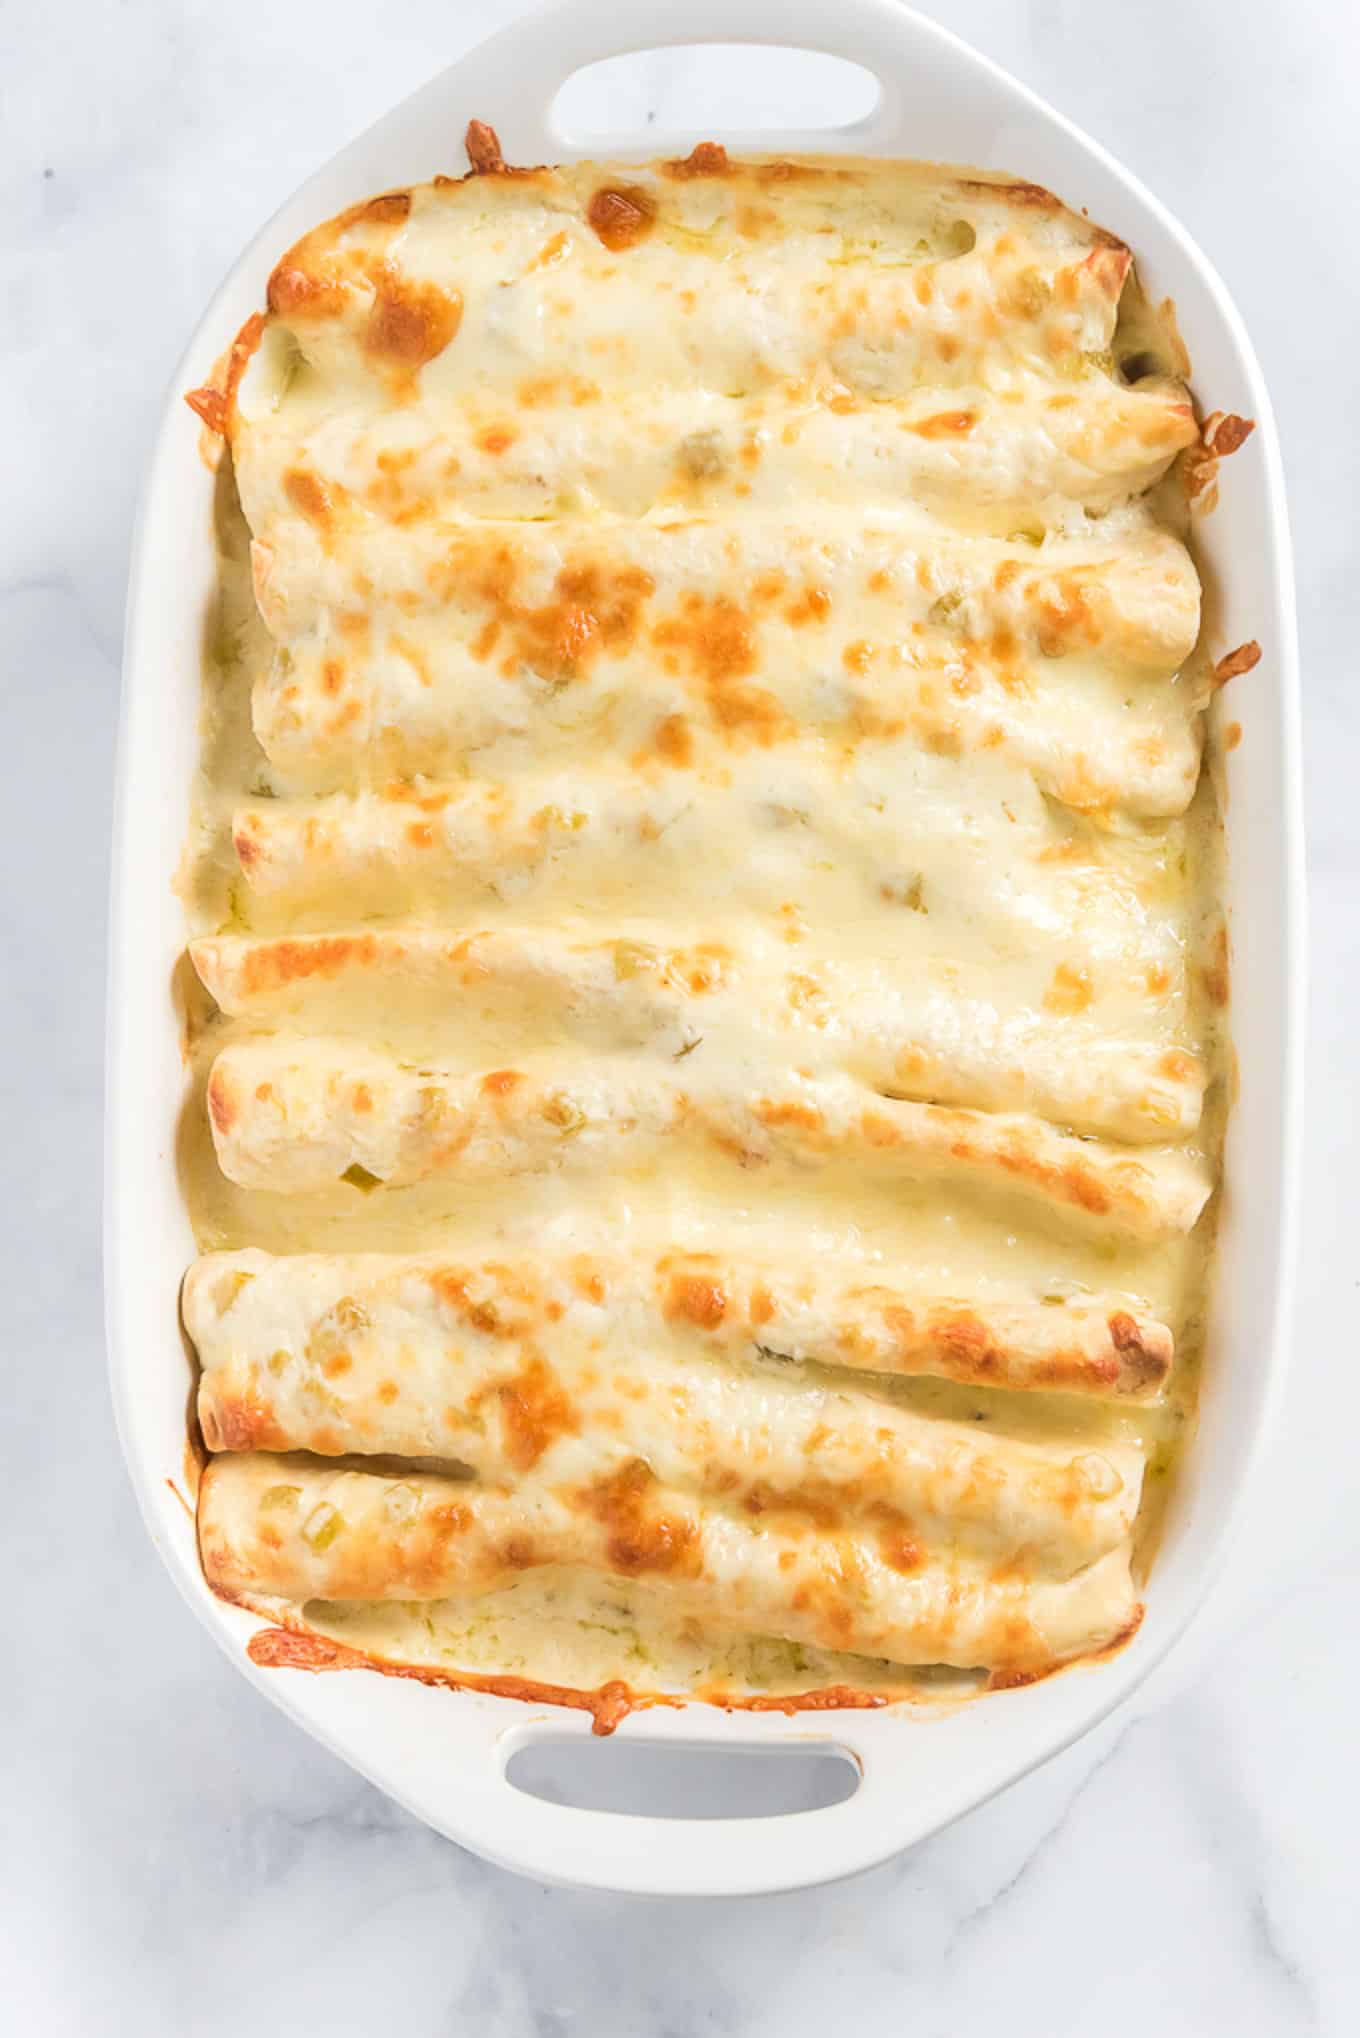 Baked chicken enchiladas in a baking dish on the table.